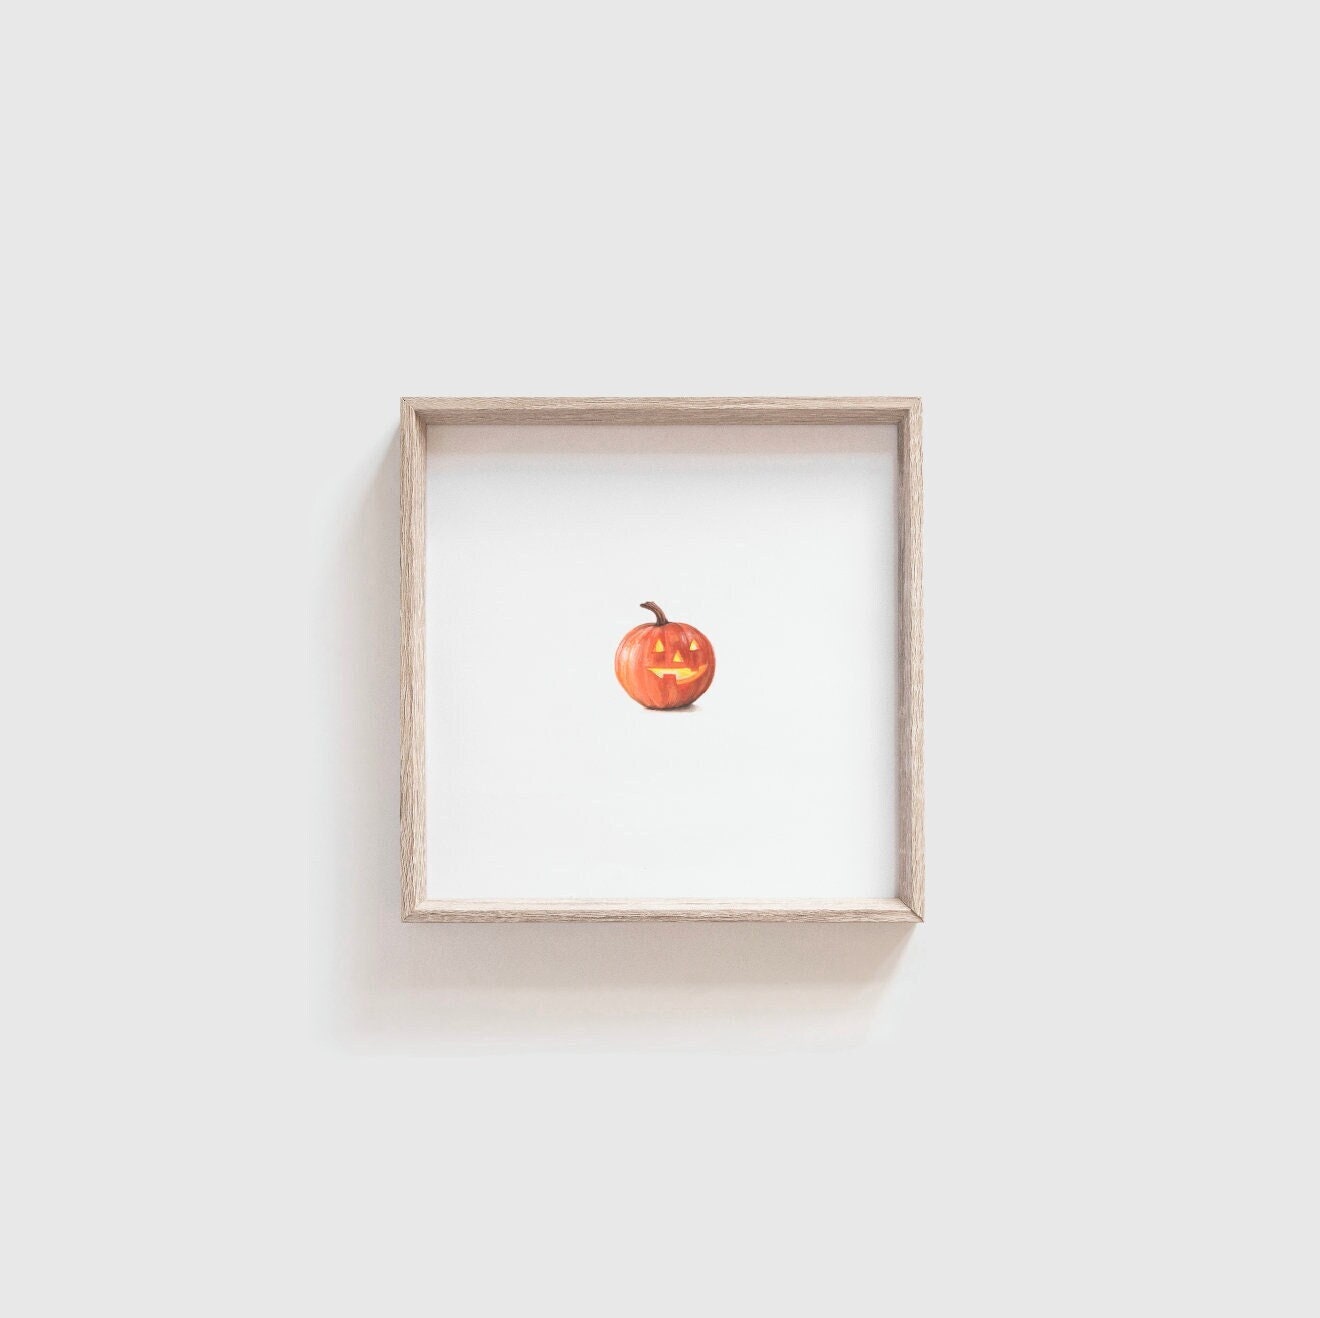 Tiny Things Painting Art Print by tired_and_pissed